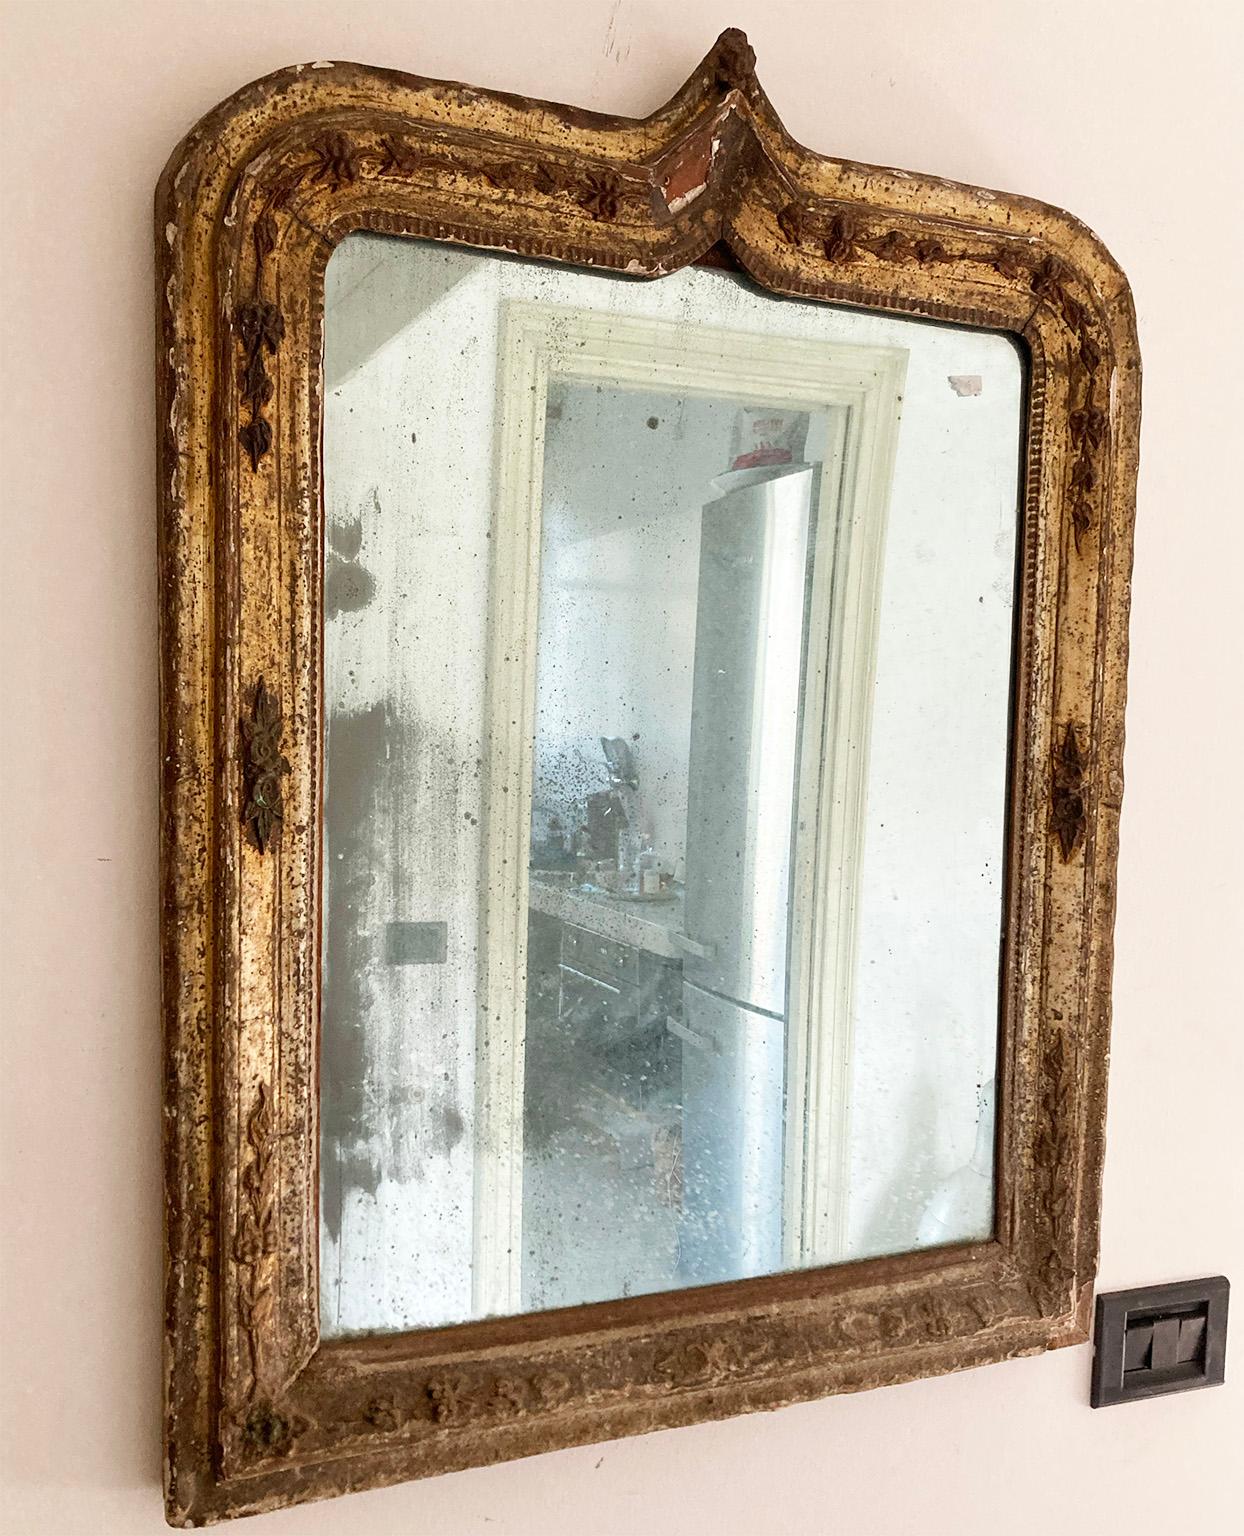 Neoclassical Eighteenth Century Sicilian Wall Mirror with Gilded Wooden Frame, Sicily 18th C